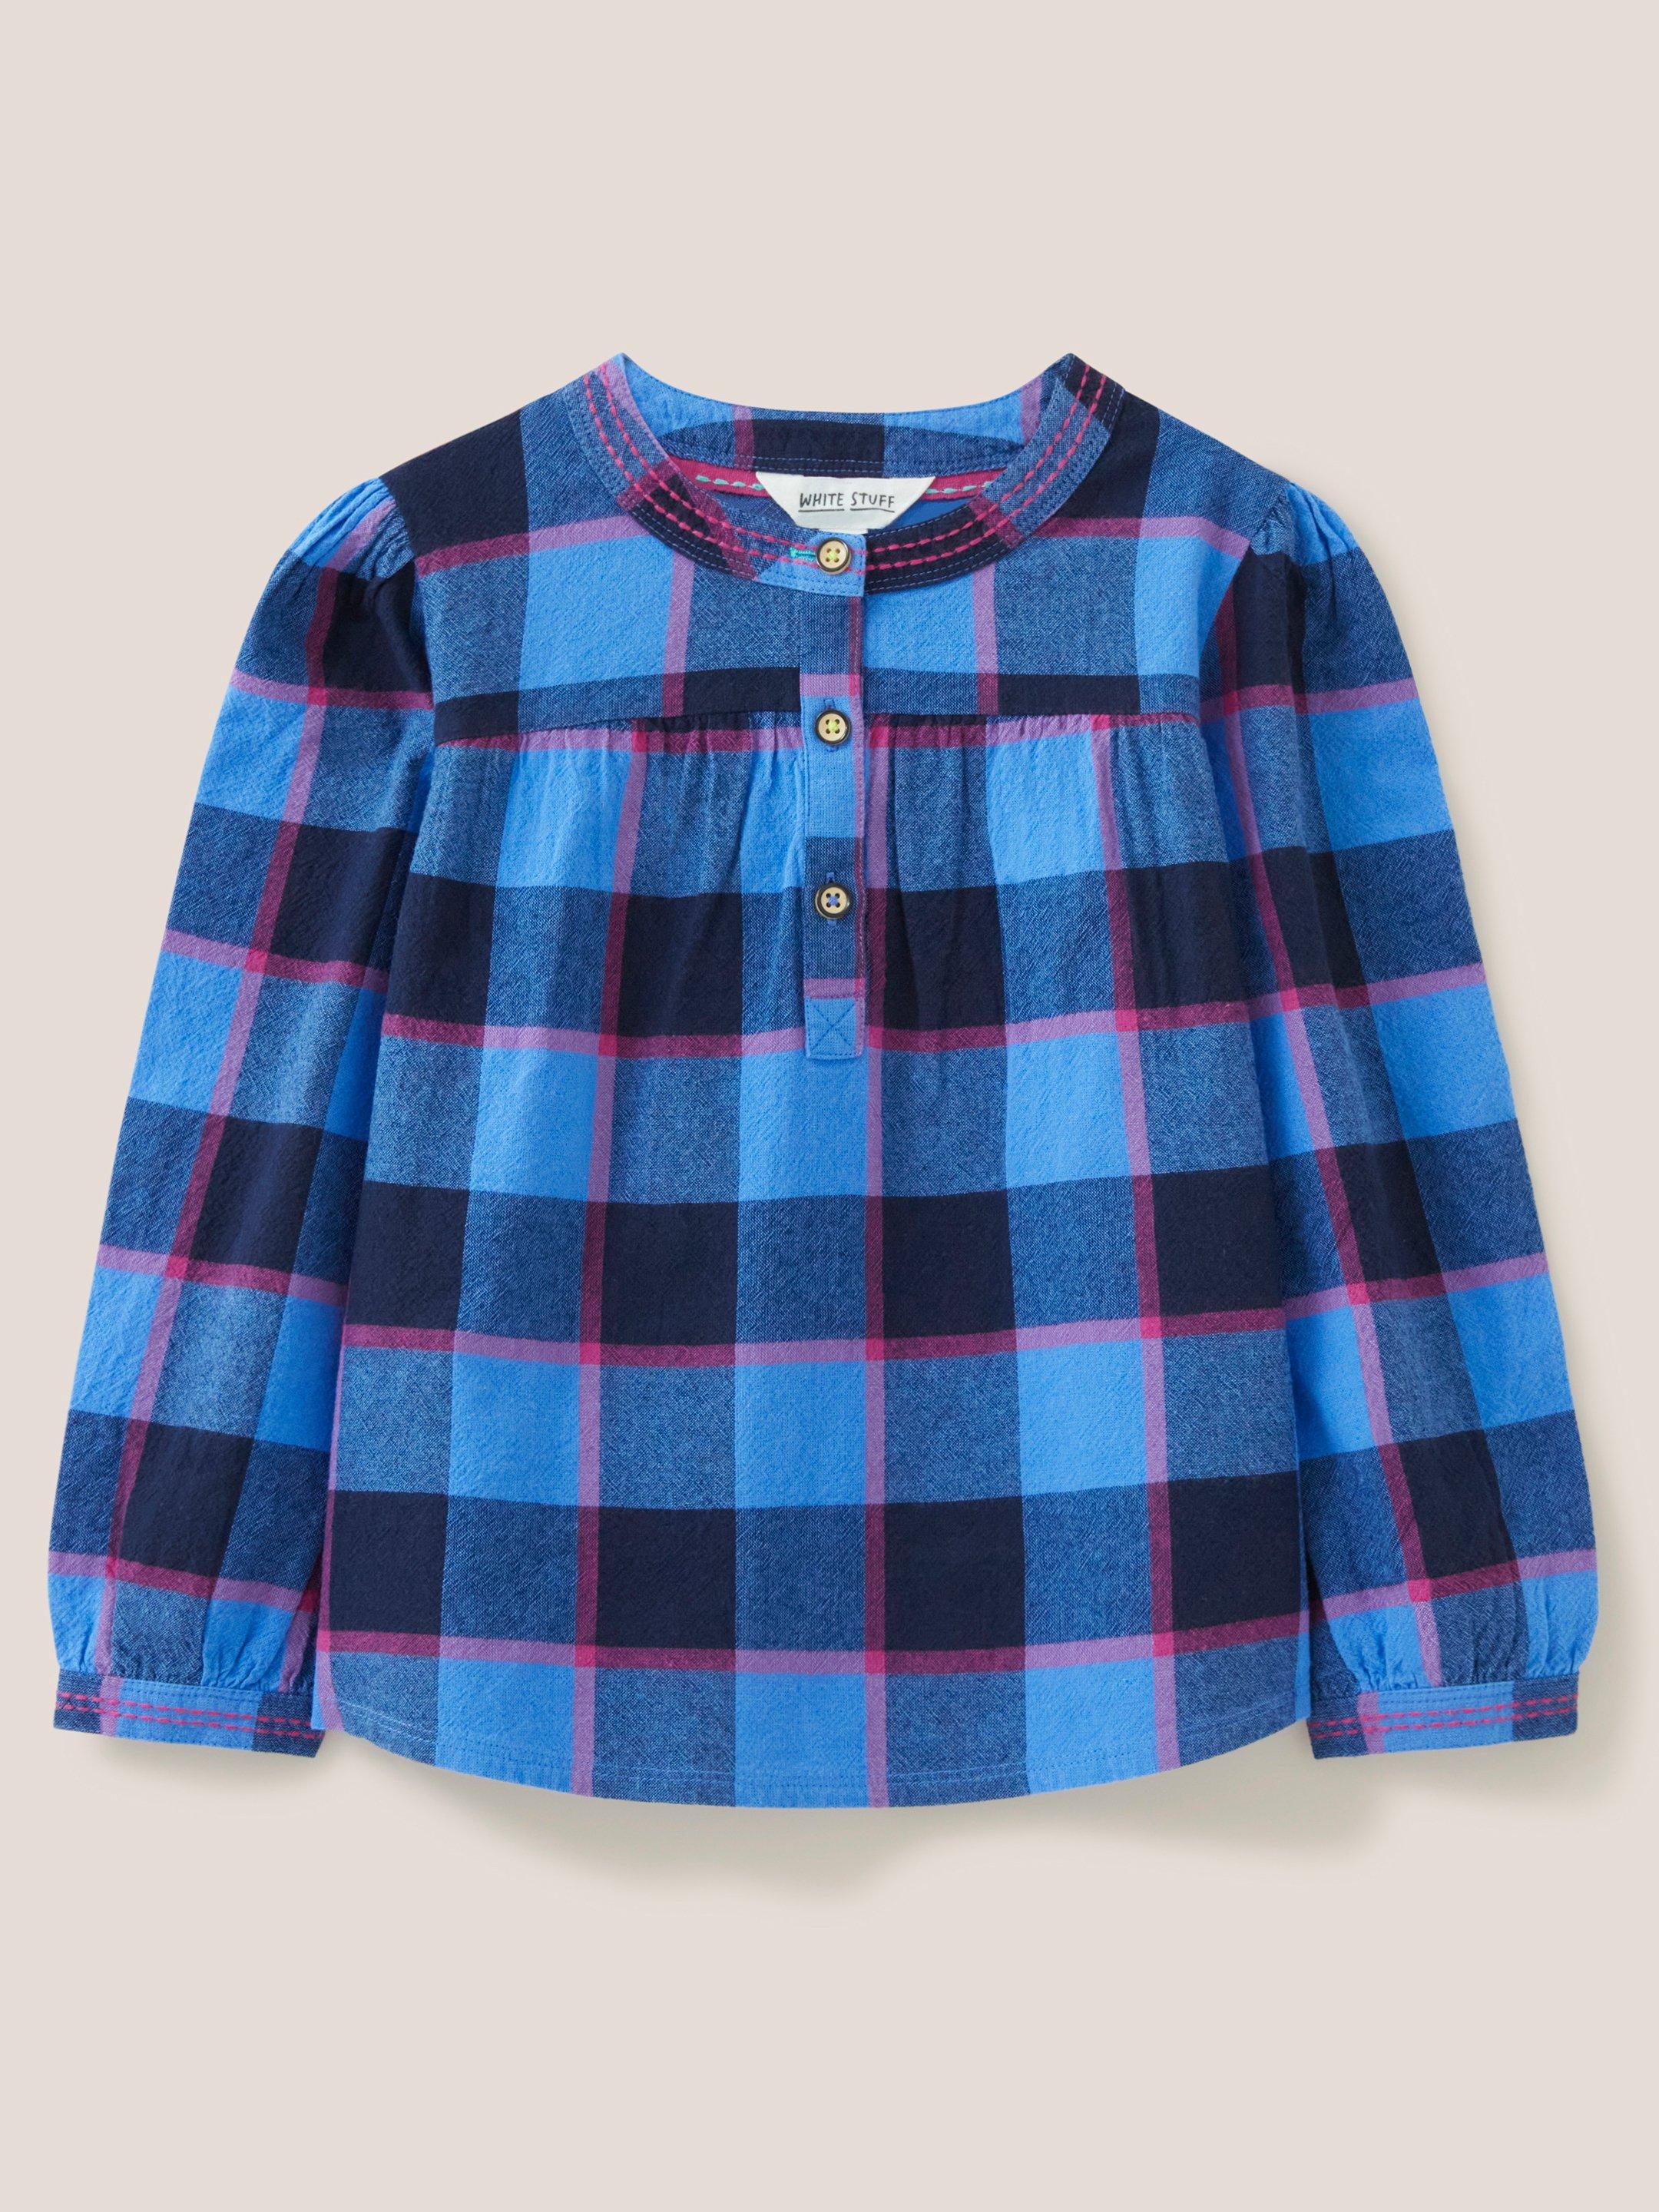 Molly Check Top in BLUE MLT - FLAT FRONT